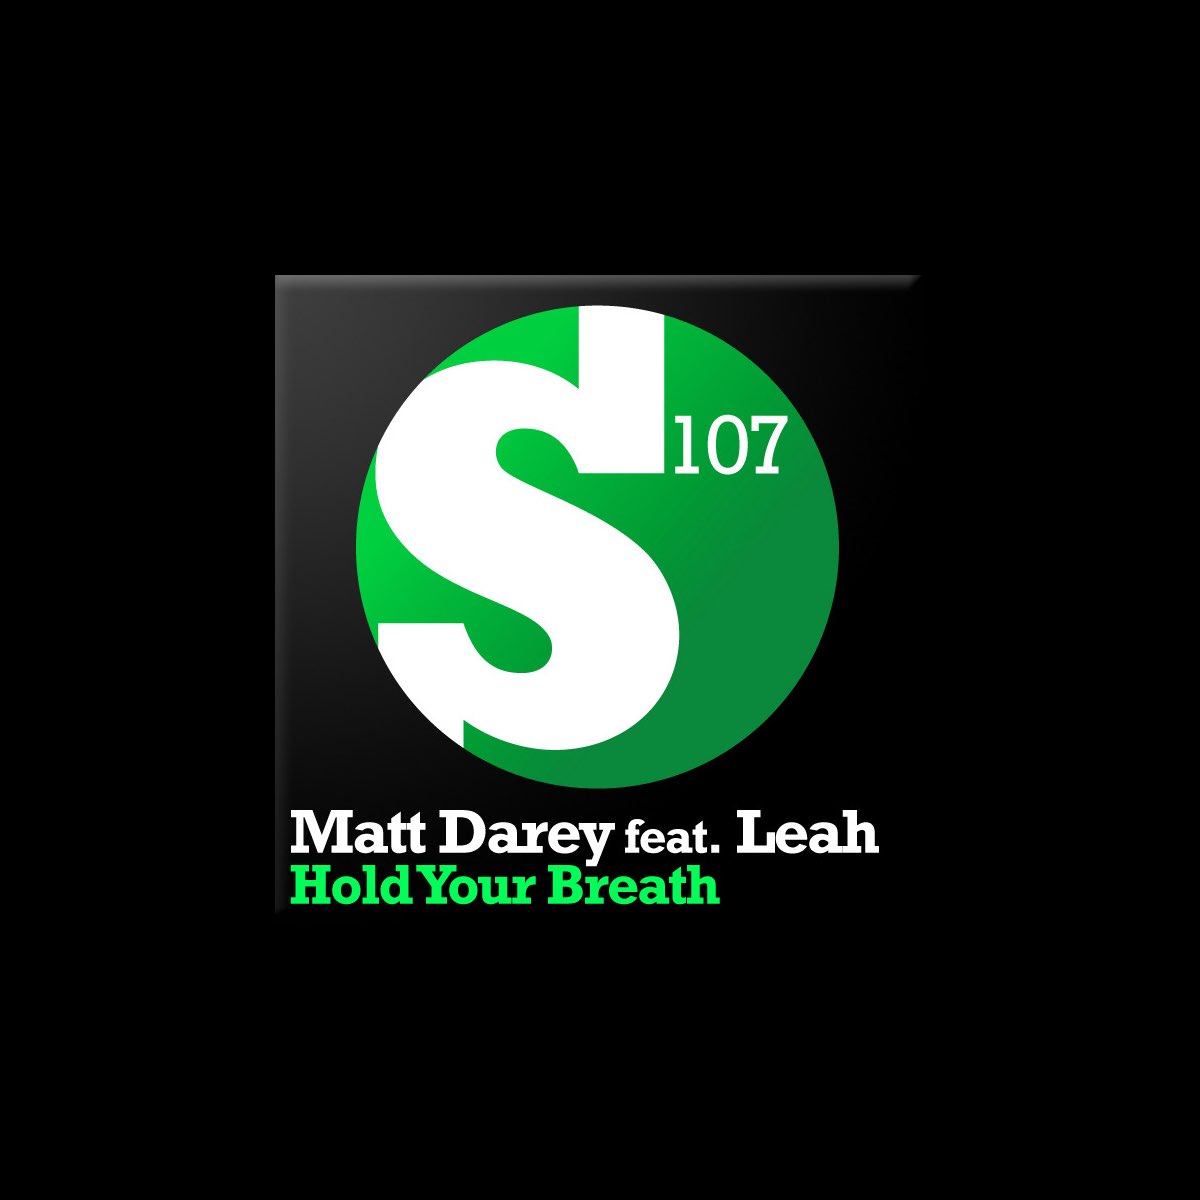 Hold Your Breath (Remixes) [feat. Leah] by Matt Darey on Apple Music